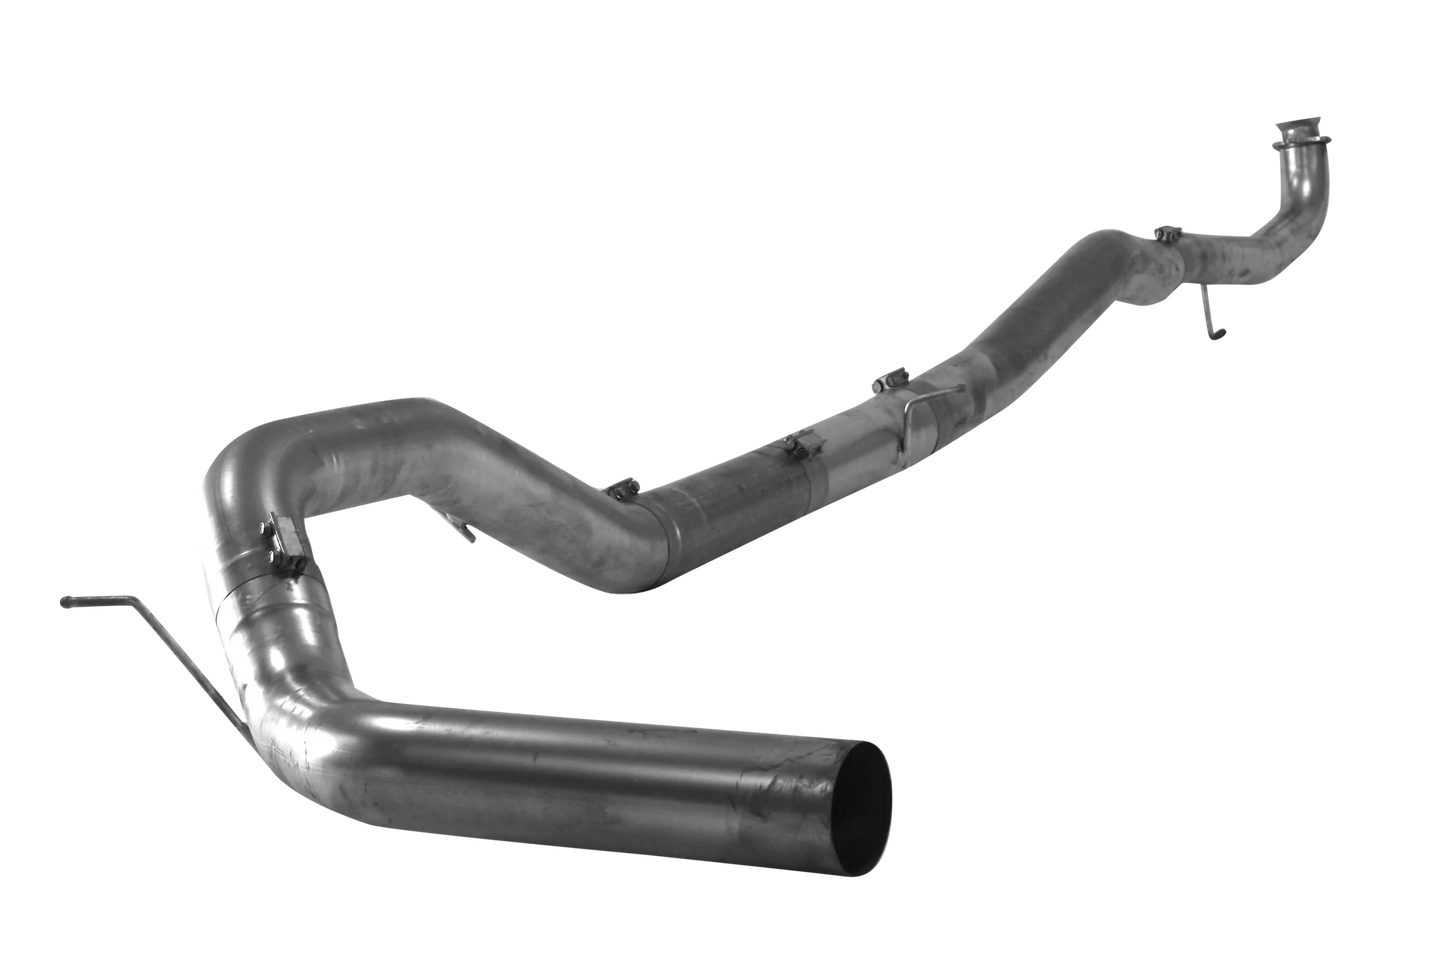 431027 431028 432027 432028 Mel's Manufacturing 4" Downpipe Back Single | 2020-2023 GM 2500/3500 6.6L DURAMAX L5P Mels Mfg FloPro Flo-Pro Flo Pro Hell On Wheels Performance Ltd Limited Canadian Owned and Operated Online Diesel Parts Distribution & Wholesale Supply Center in Alberta Canada Shipping Supplying to Alberta British Columbia Sask Saskatchewan Manitoba Ontario Quebec Newfoundland Labrador New Brunswick Nova Scotia Prince Edward Island AB BC SK MB ON QC PQ NS NB NFLD N.L. PEI